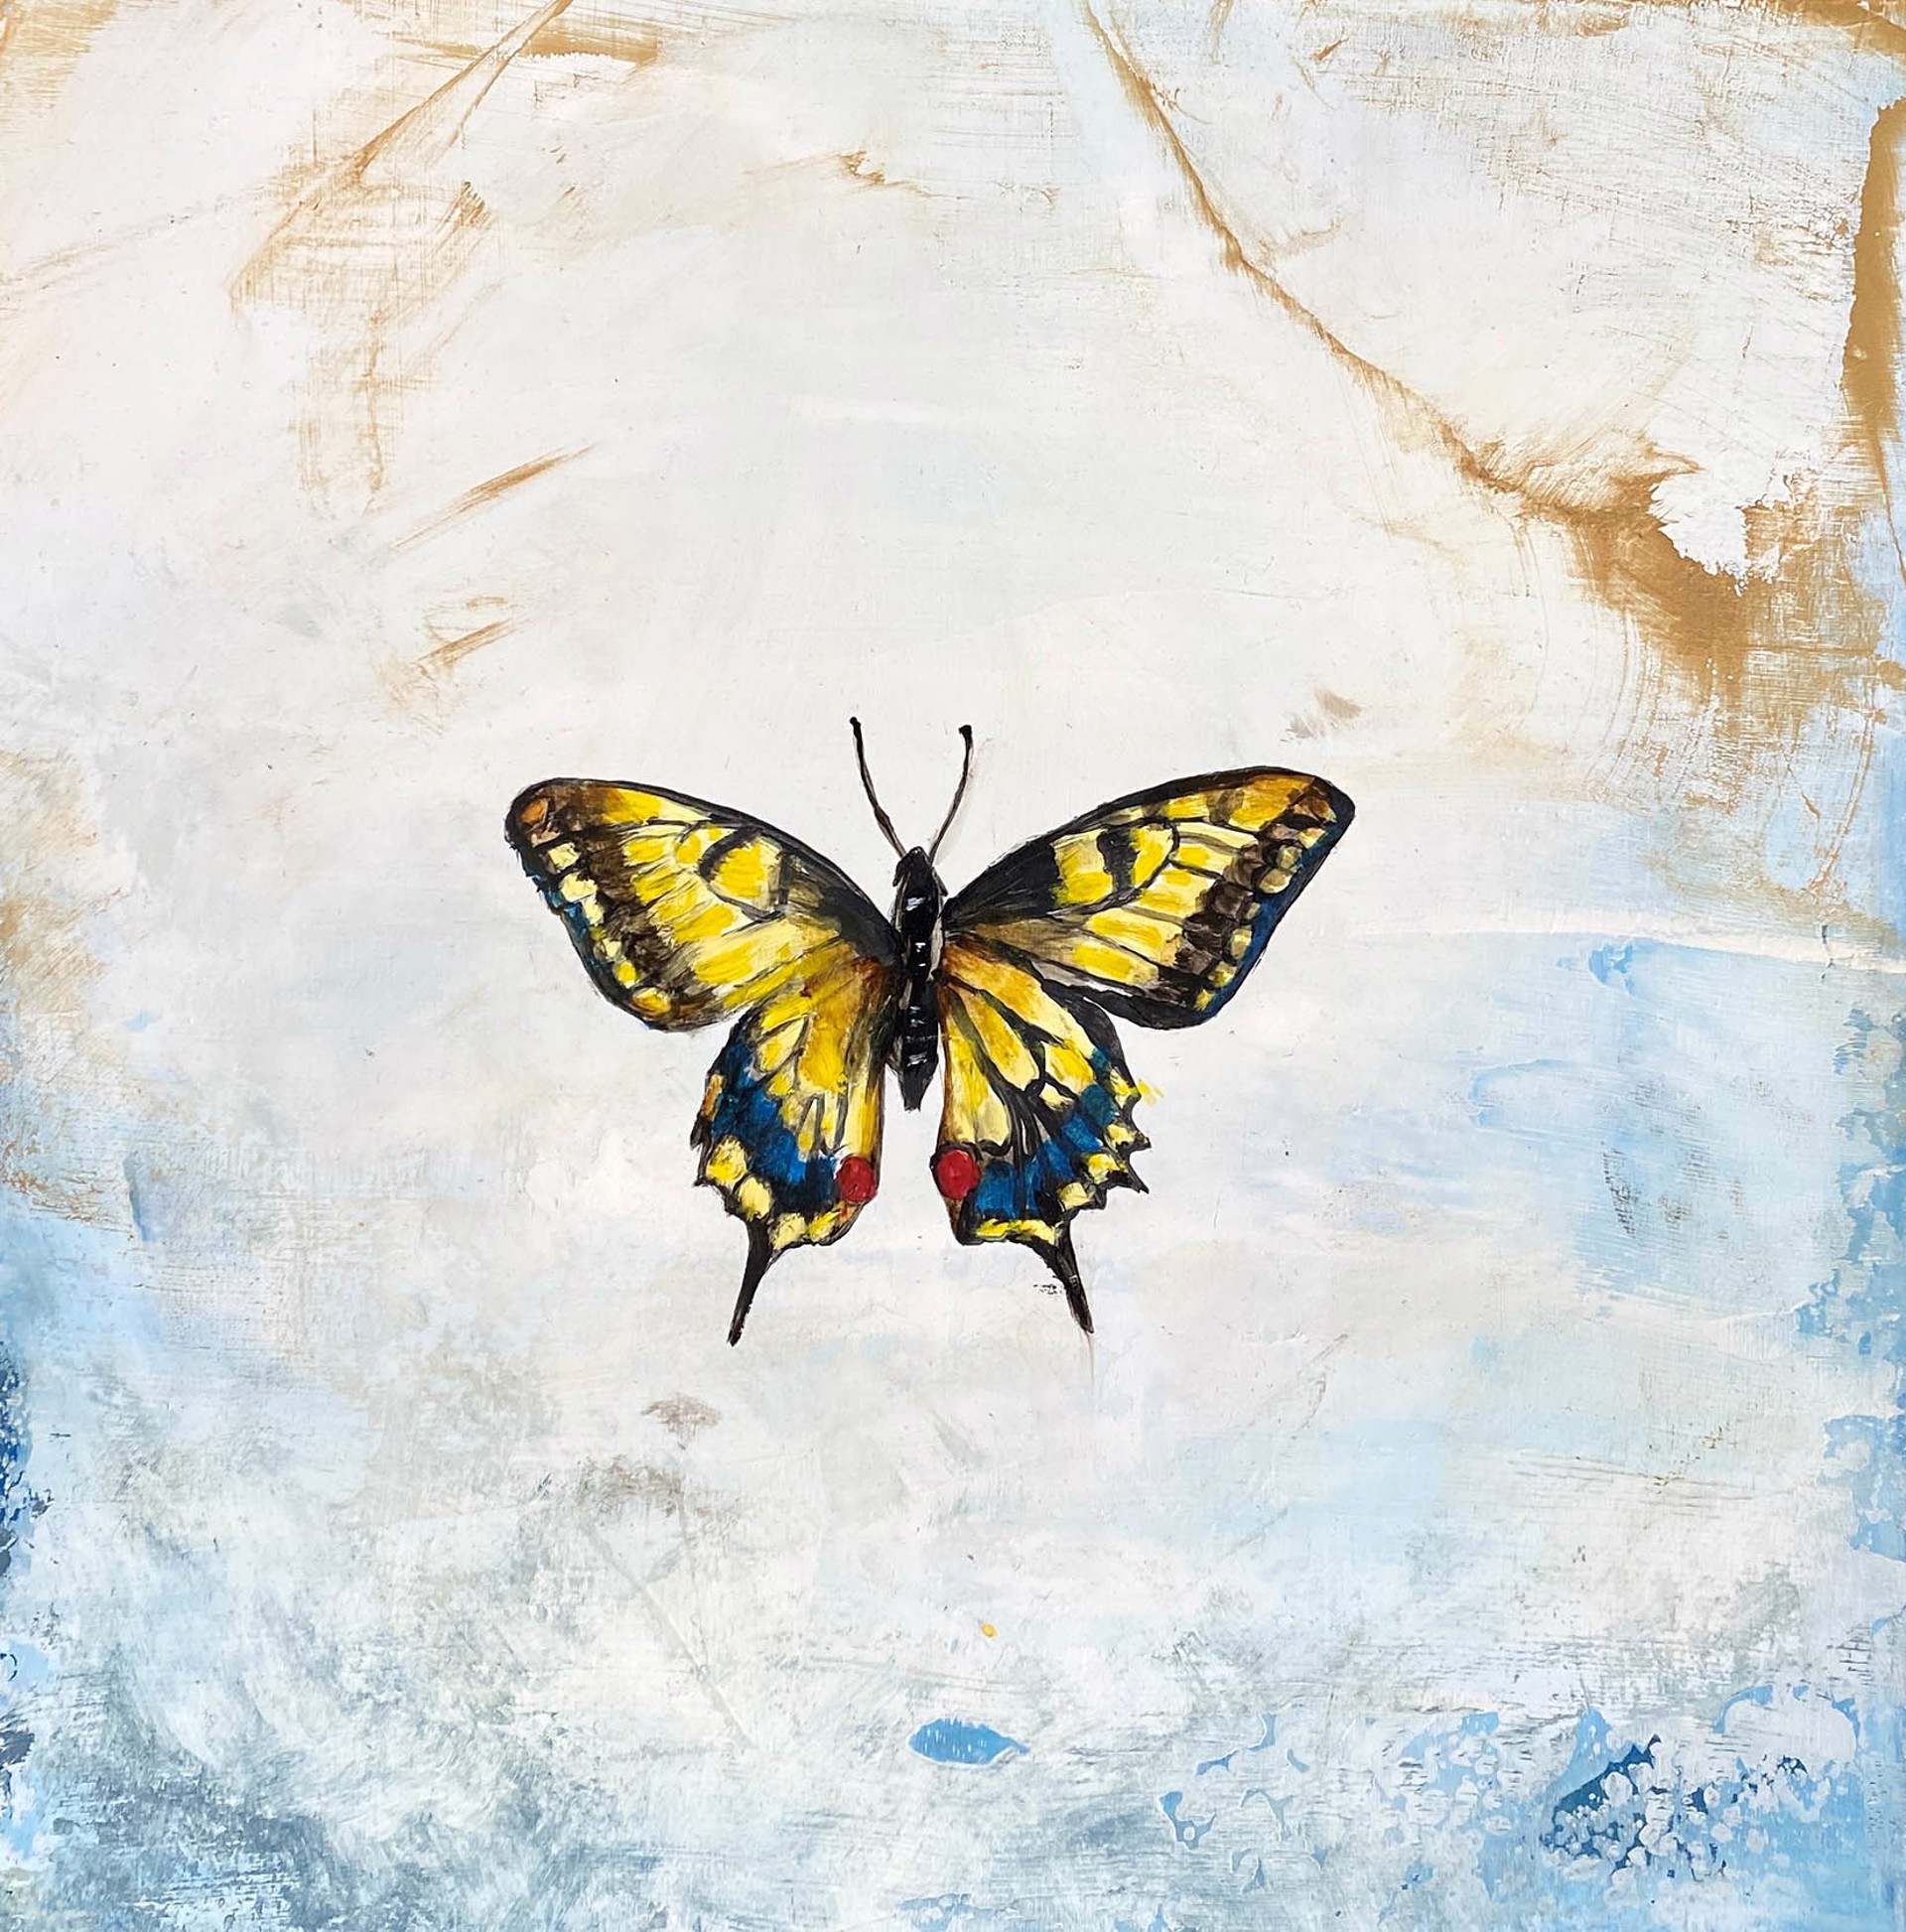 Original Oil Painting Featuring A Yellow Swallowtail Butterfly Over Abstract Background In Blue